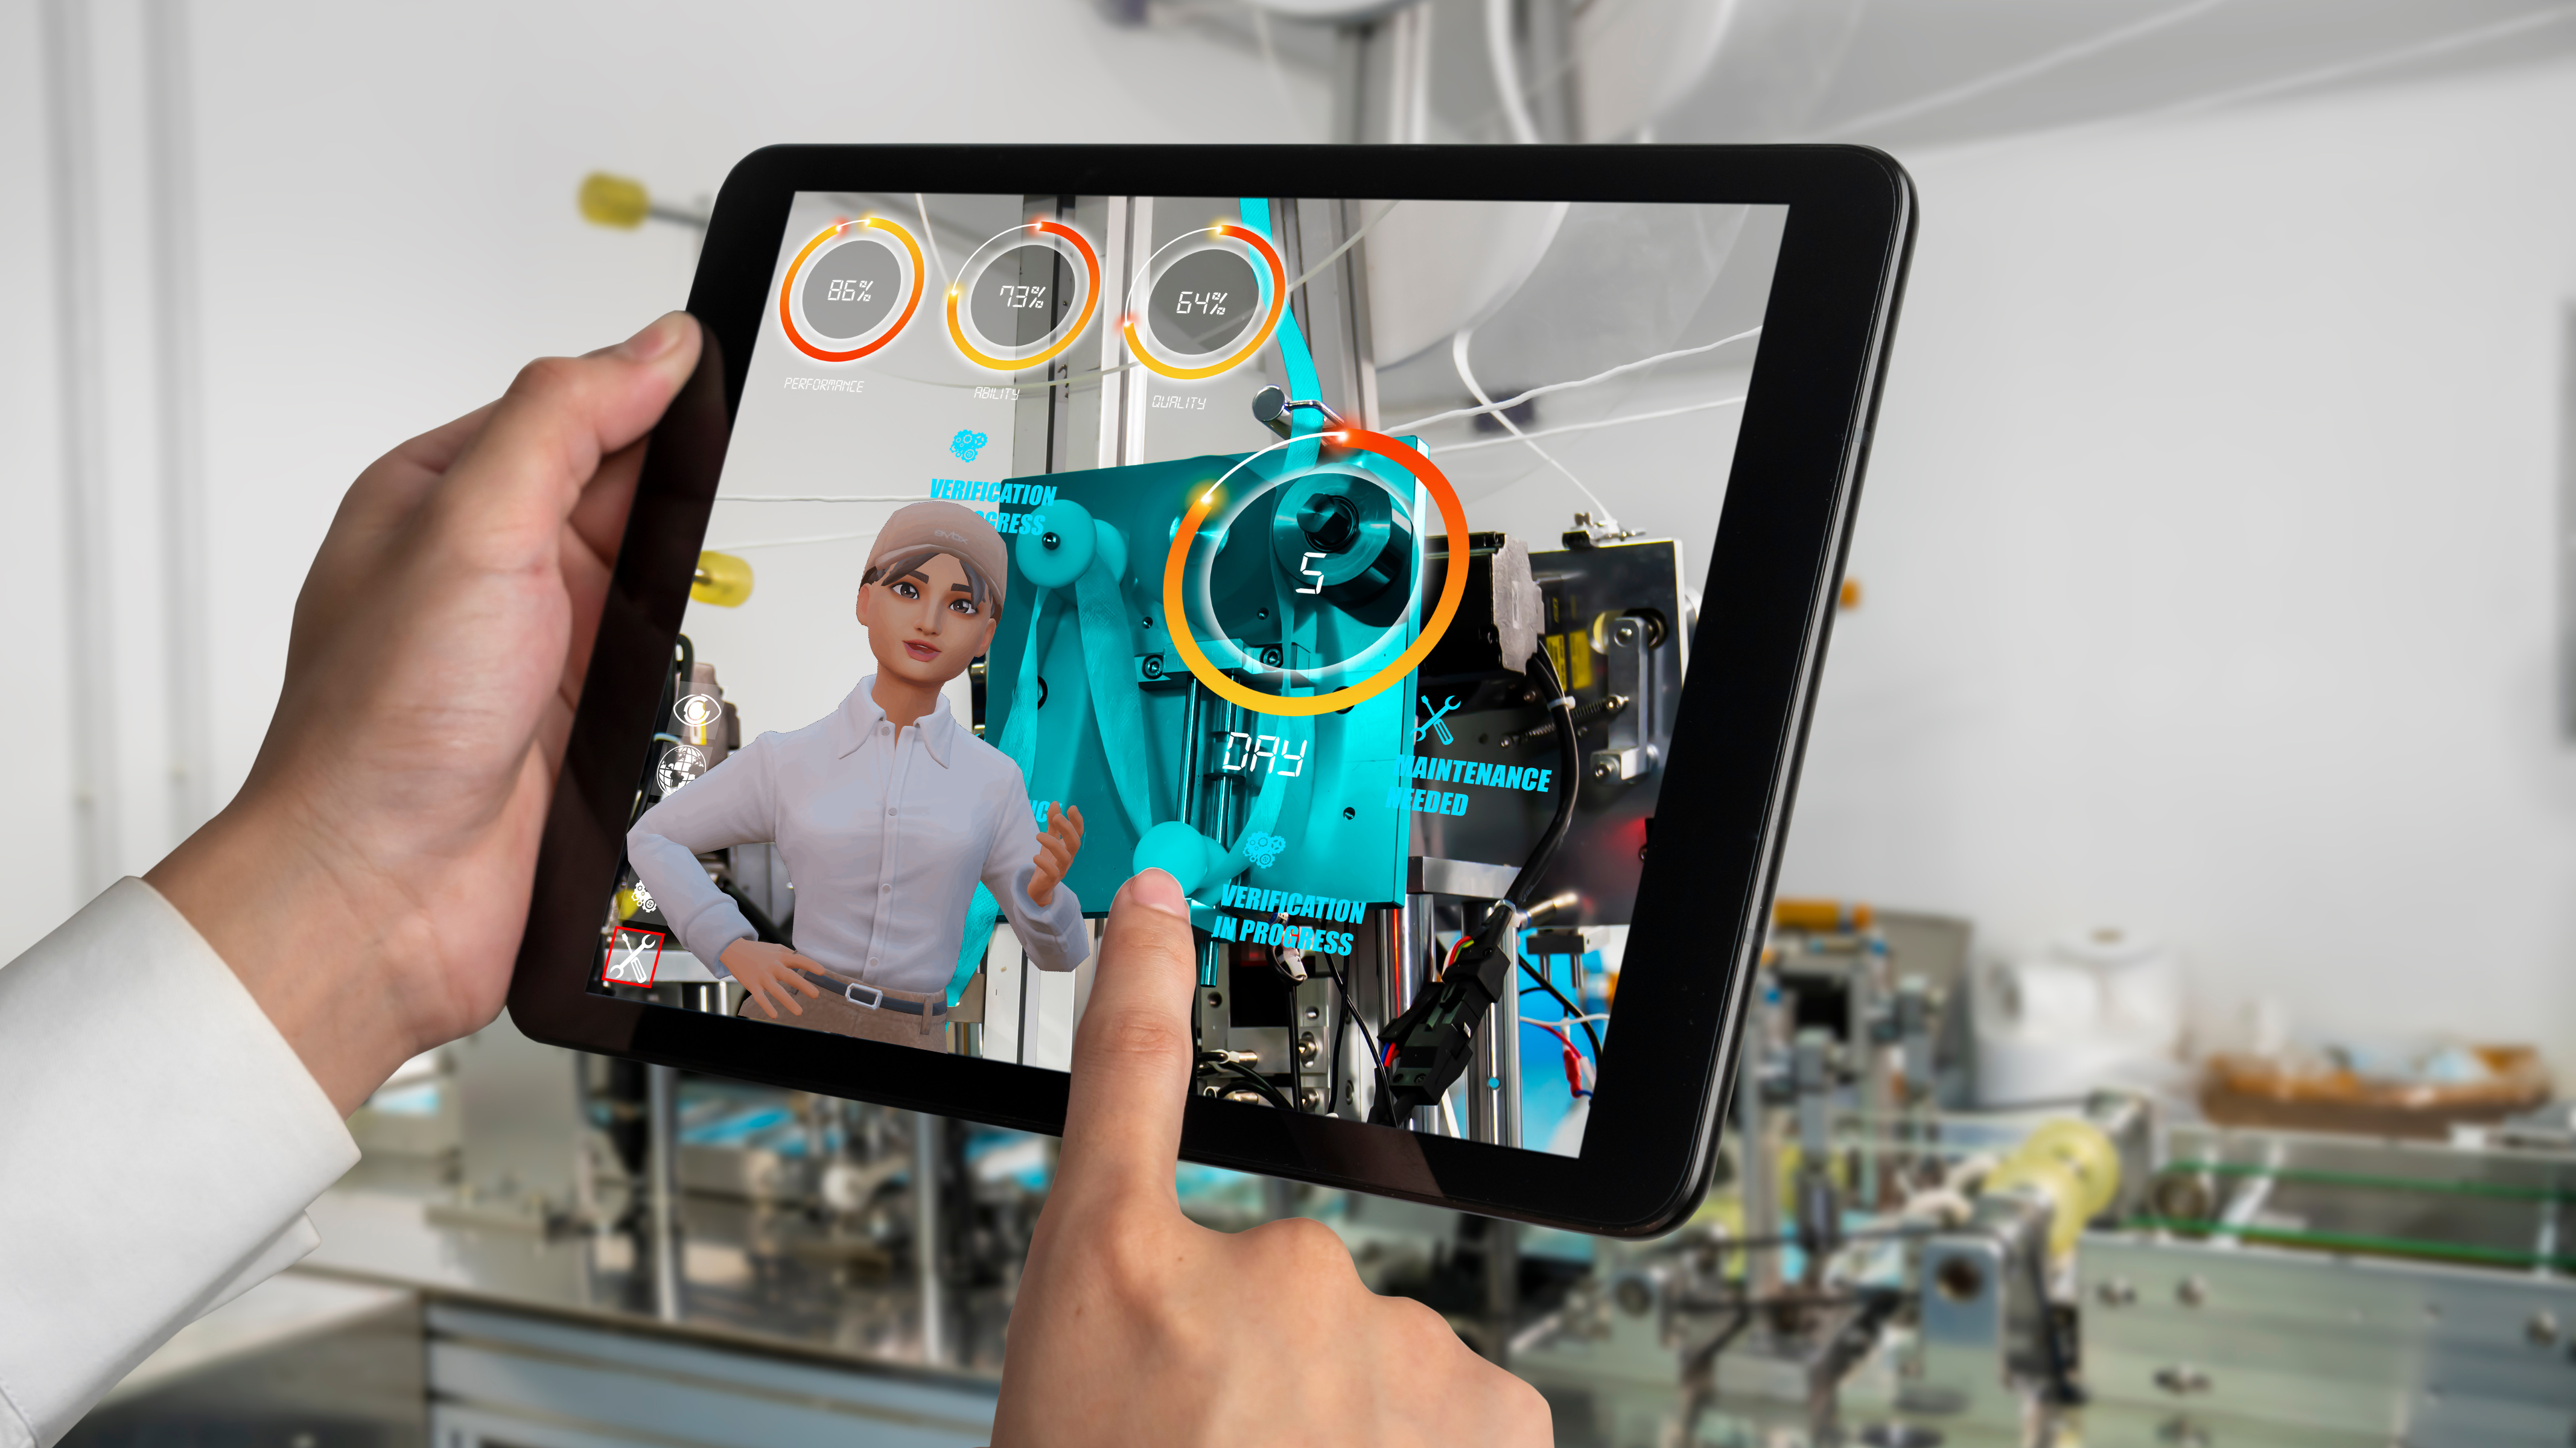 EON PERFORMANCE ASSISTANT: THE FUTURE OF REAL-WORLD OPERATION AND PRODUCT MAINTENANCE